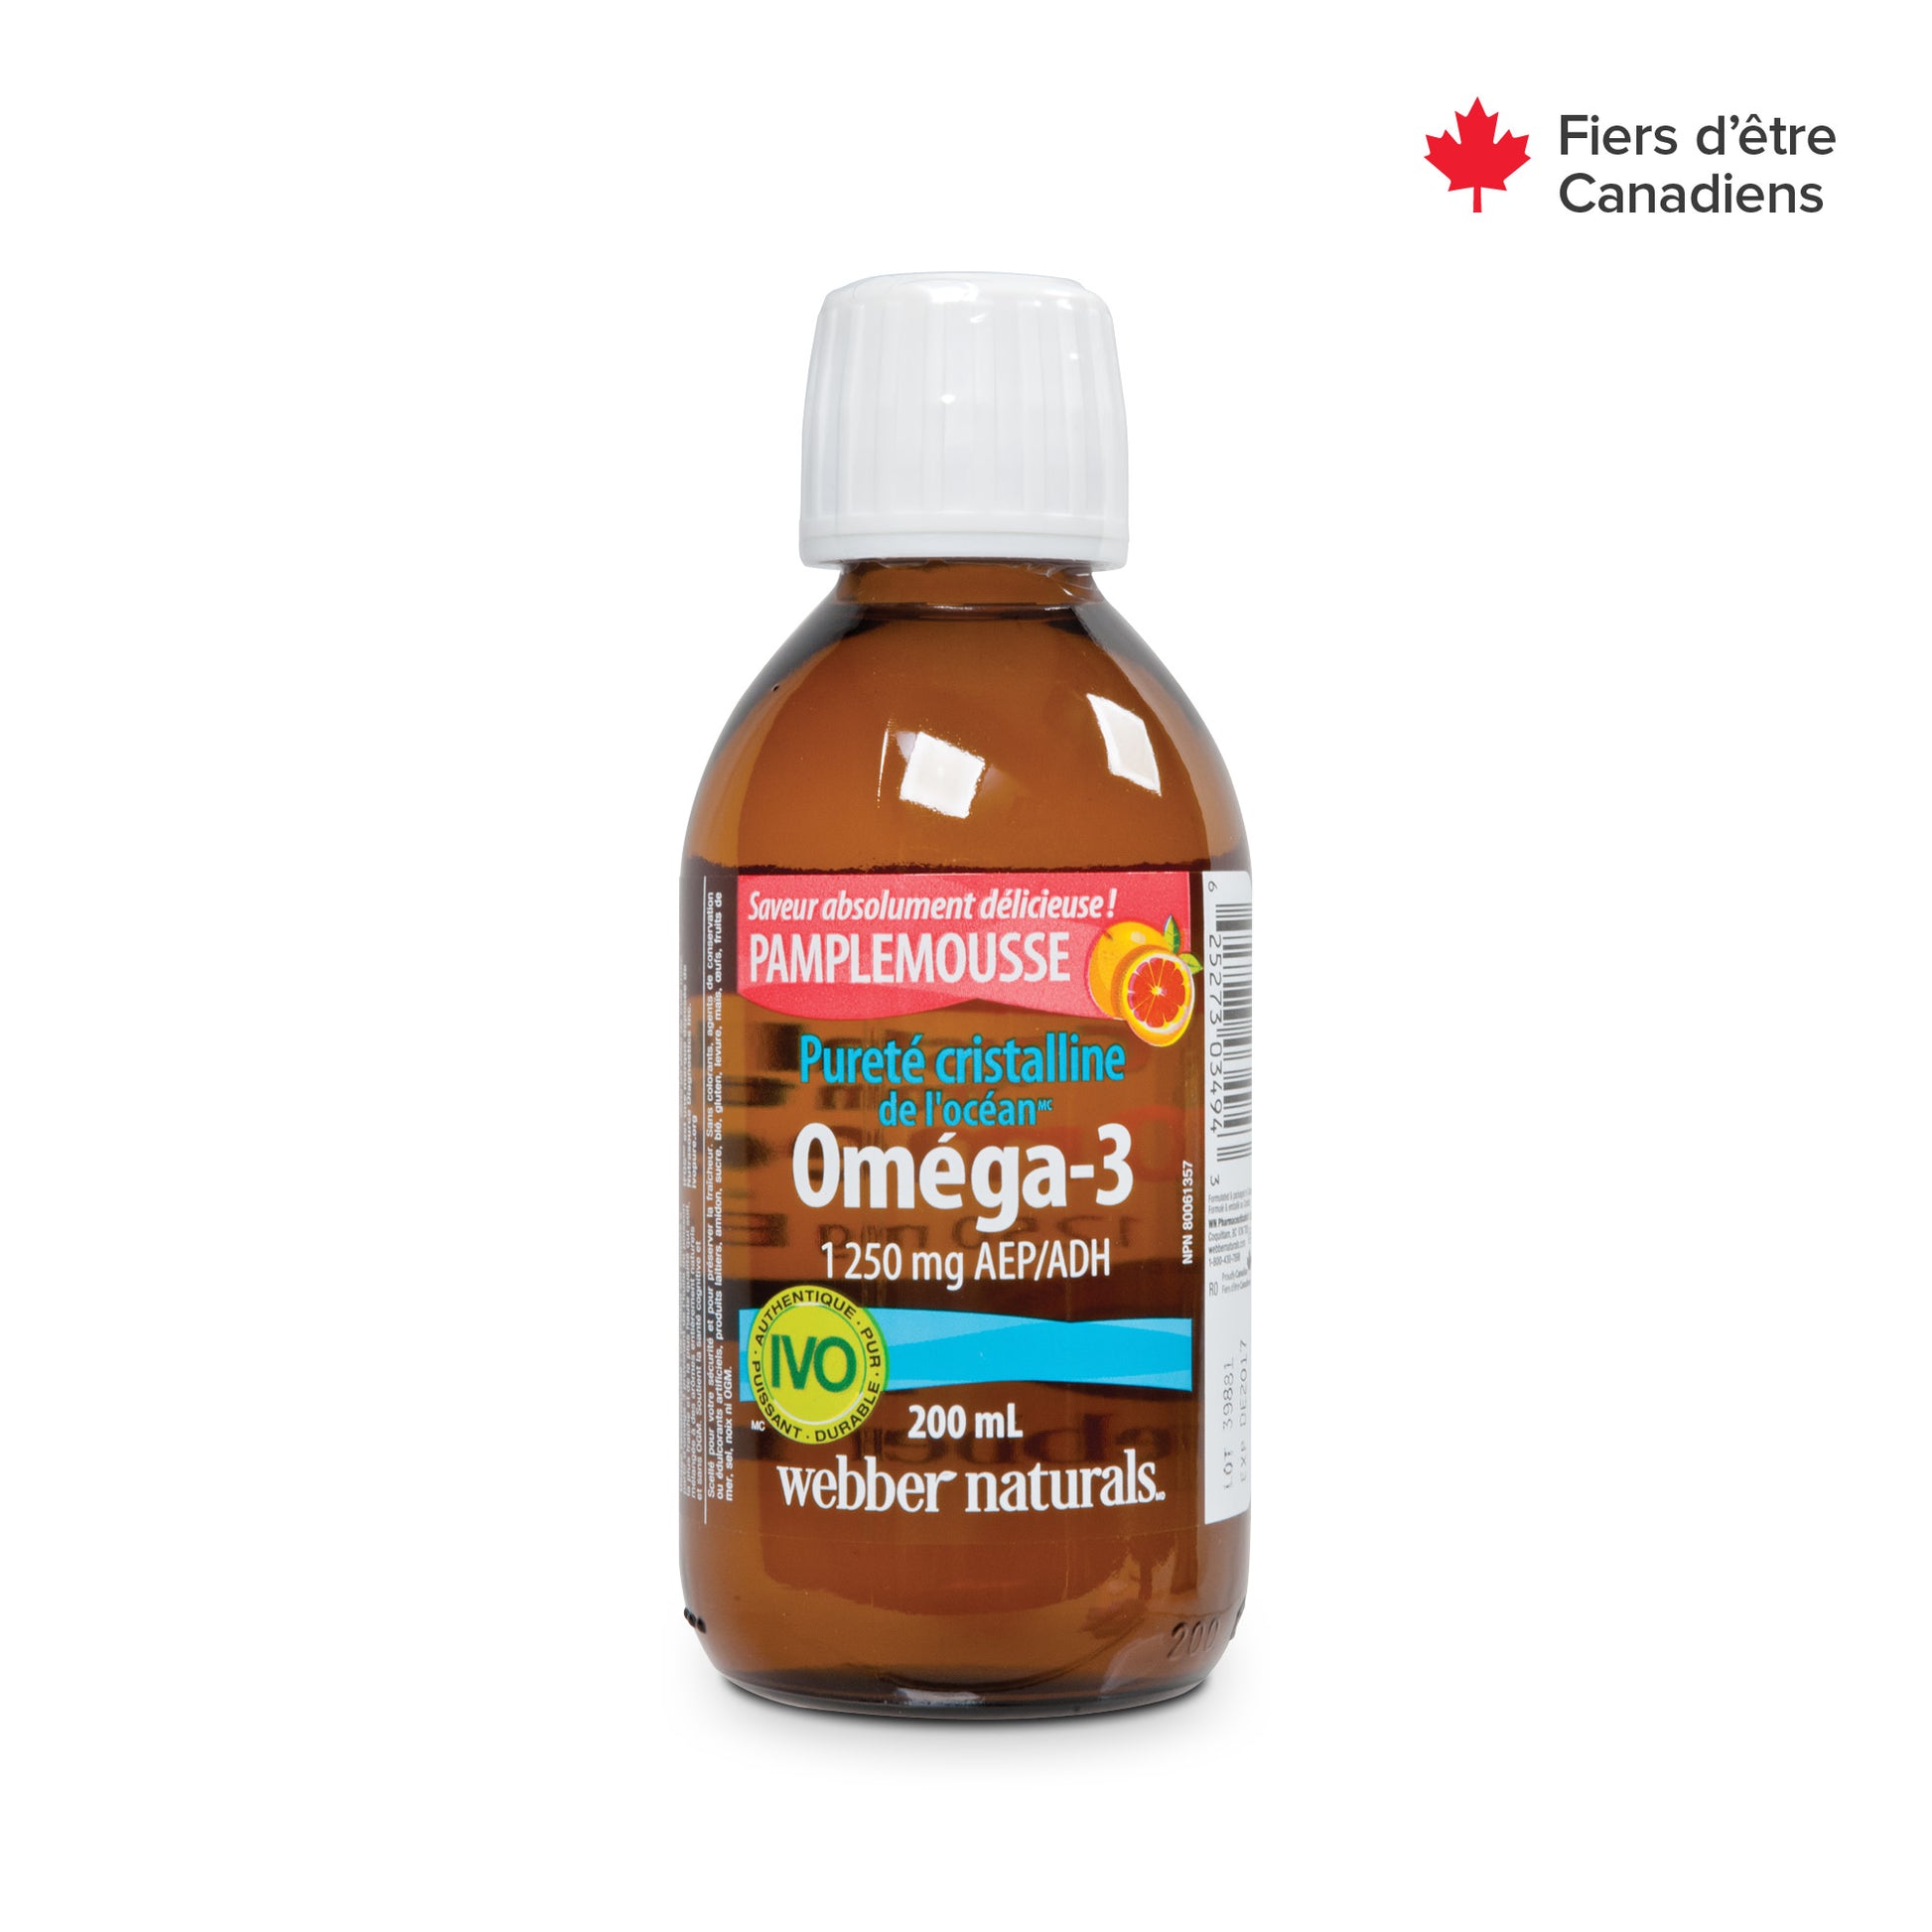 Crystal Clean from the sea® Omega-3 1250 mg EPA/DHA Grapefruit for Webber Naturals|v|hi-res|WN3494